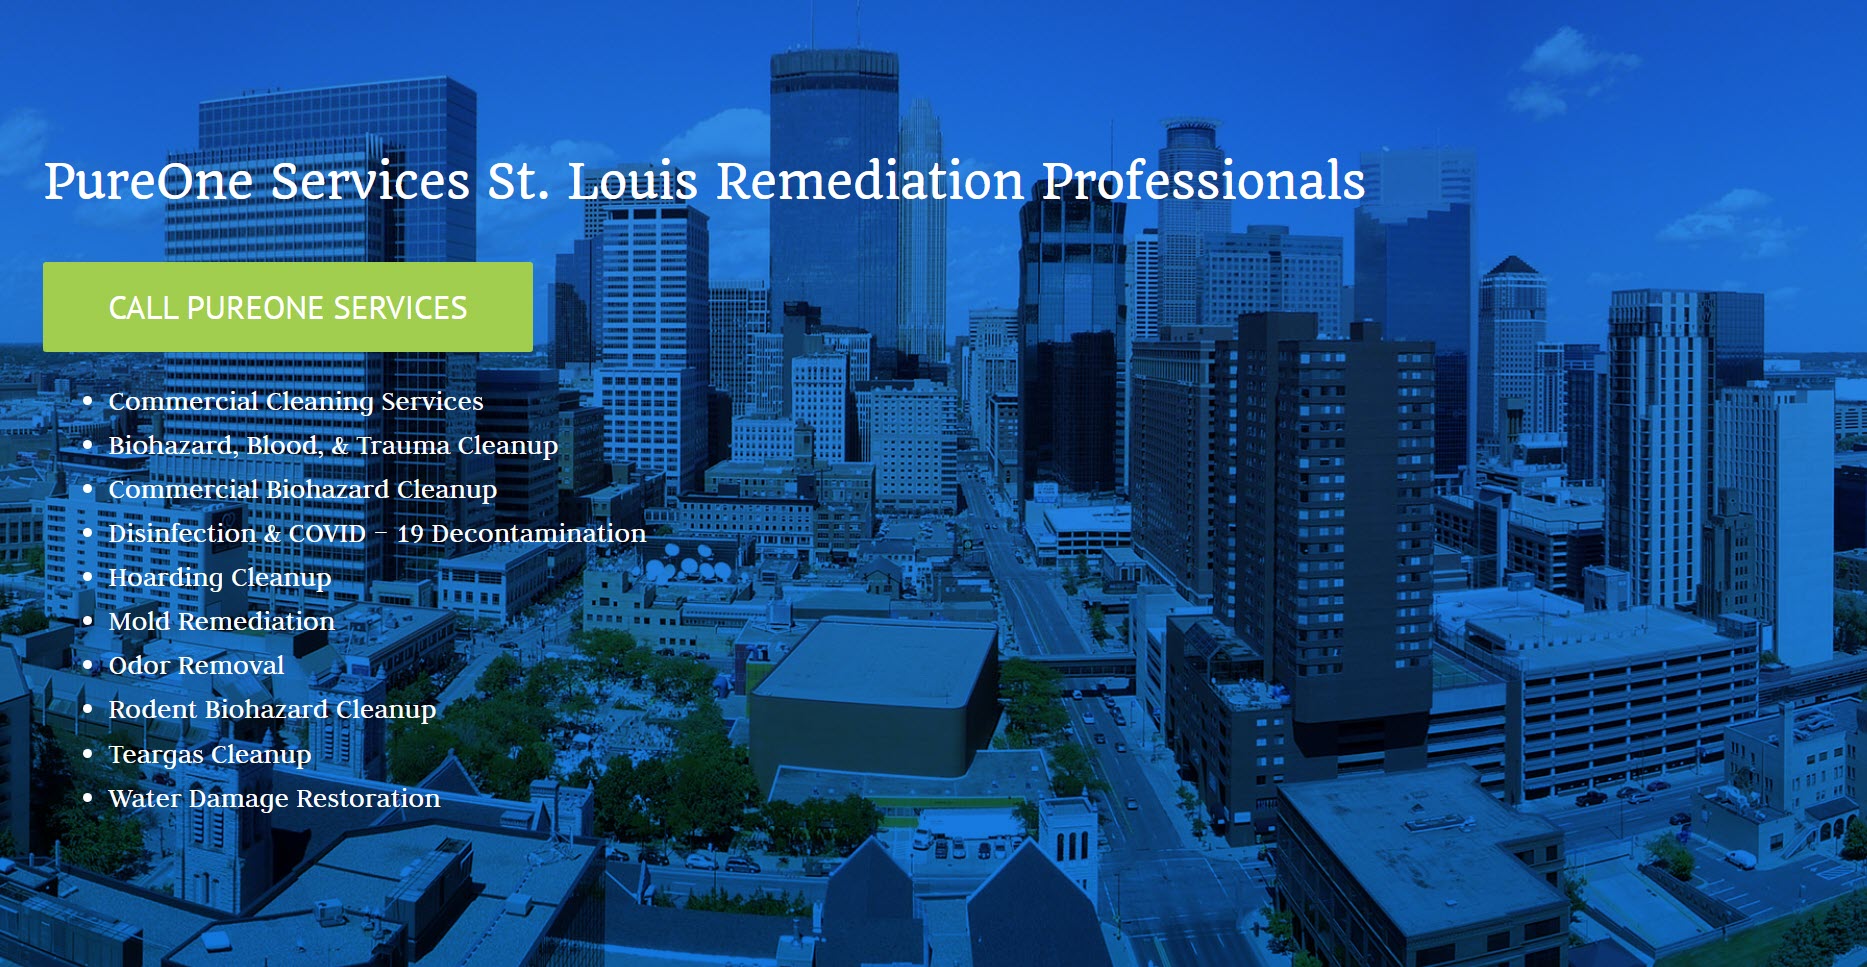 Aerial view of city skyline with text listing various remediation services offered by PureOne Services St. Louis, including biohazard cleanup, mold restoration, and water damage restoration. A button reads "Call PureOne Services. -PureOneServices